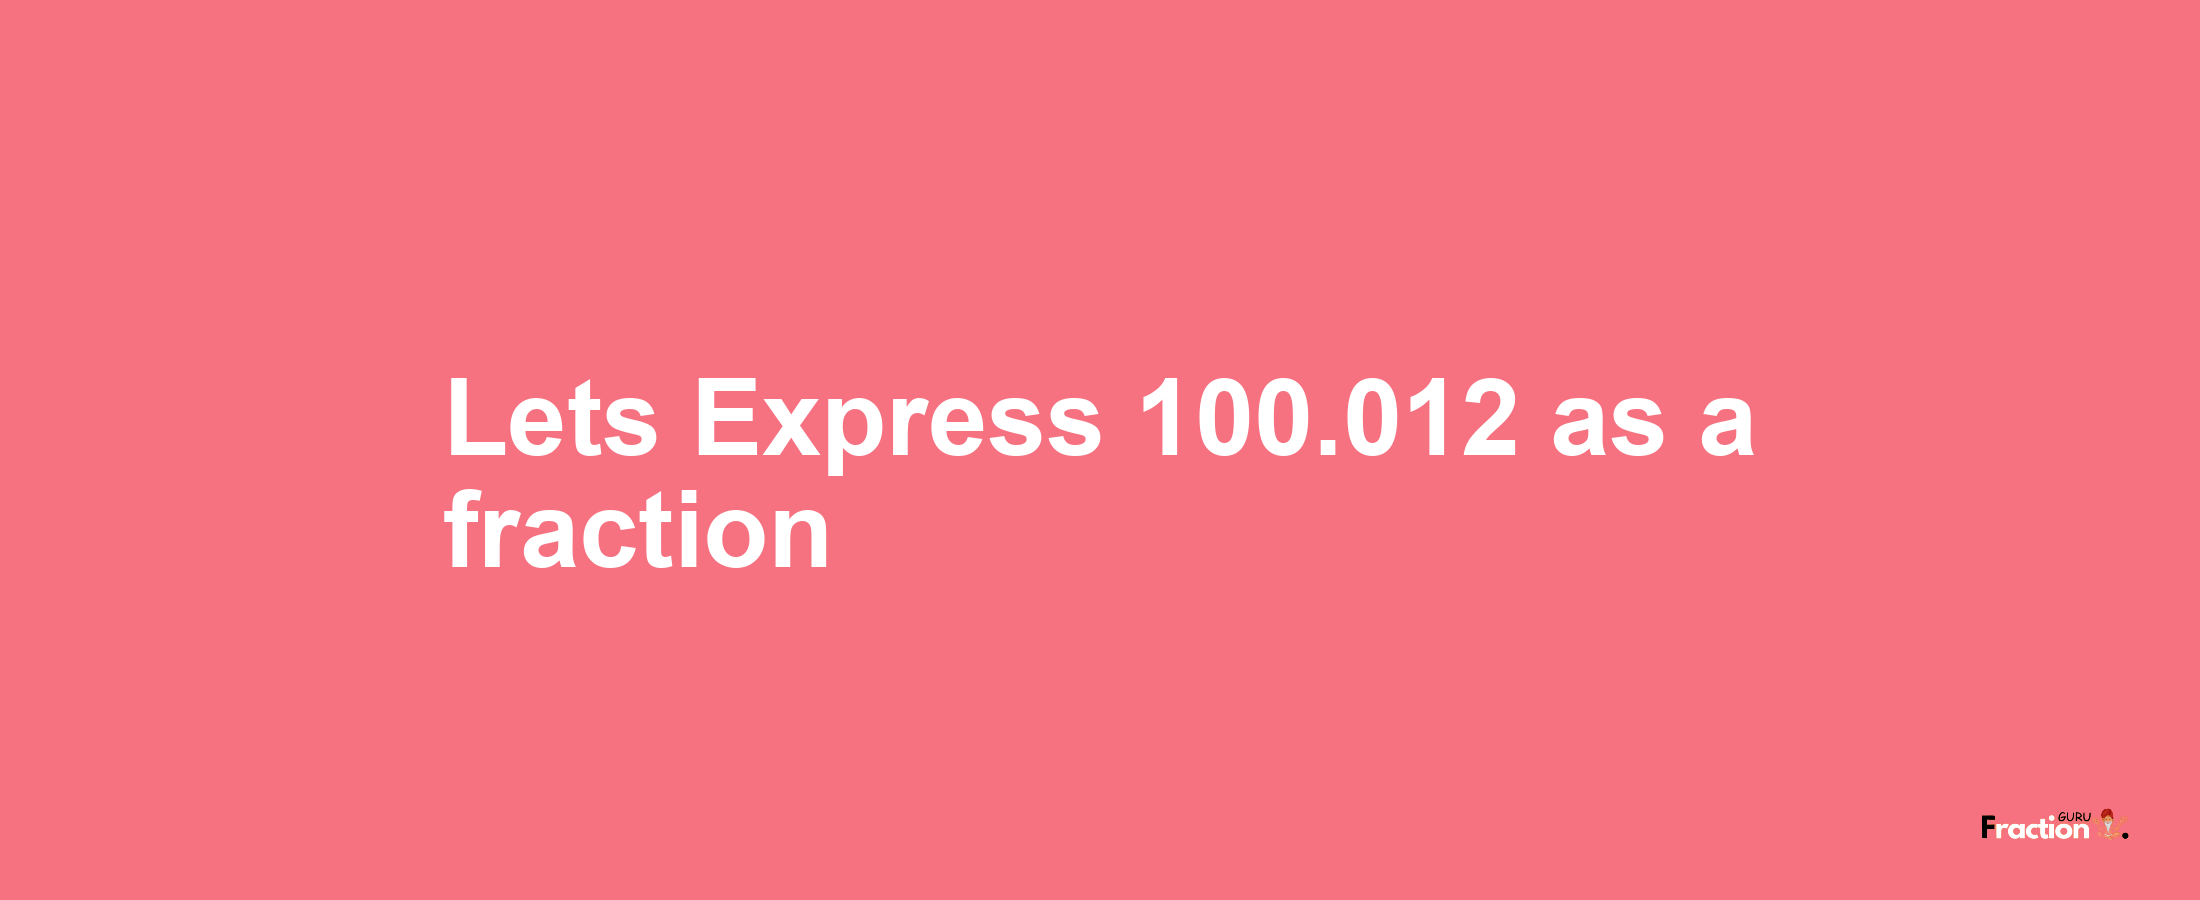 Lets Express 100.012 as afraction